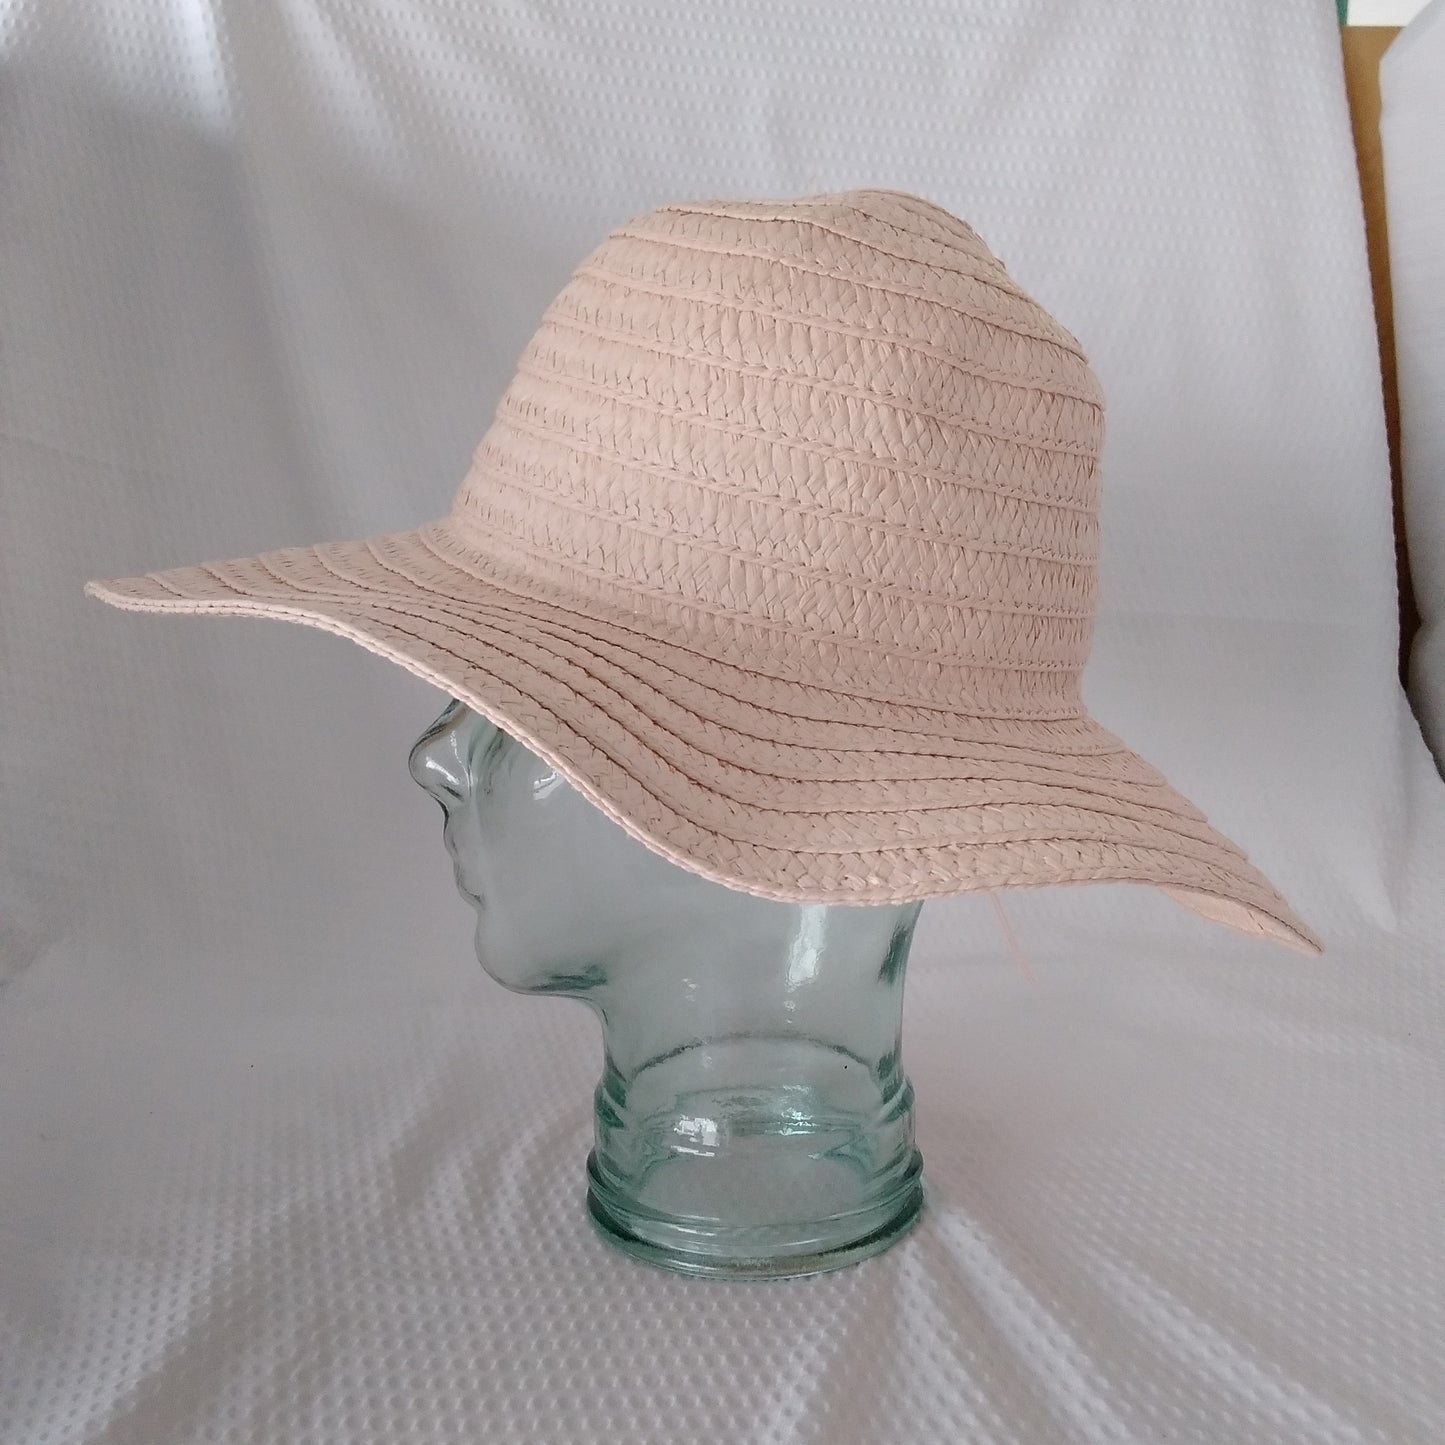 Time and True Women's Pink floppy Hat